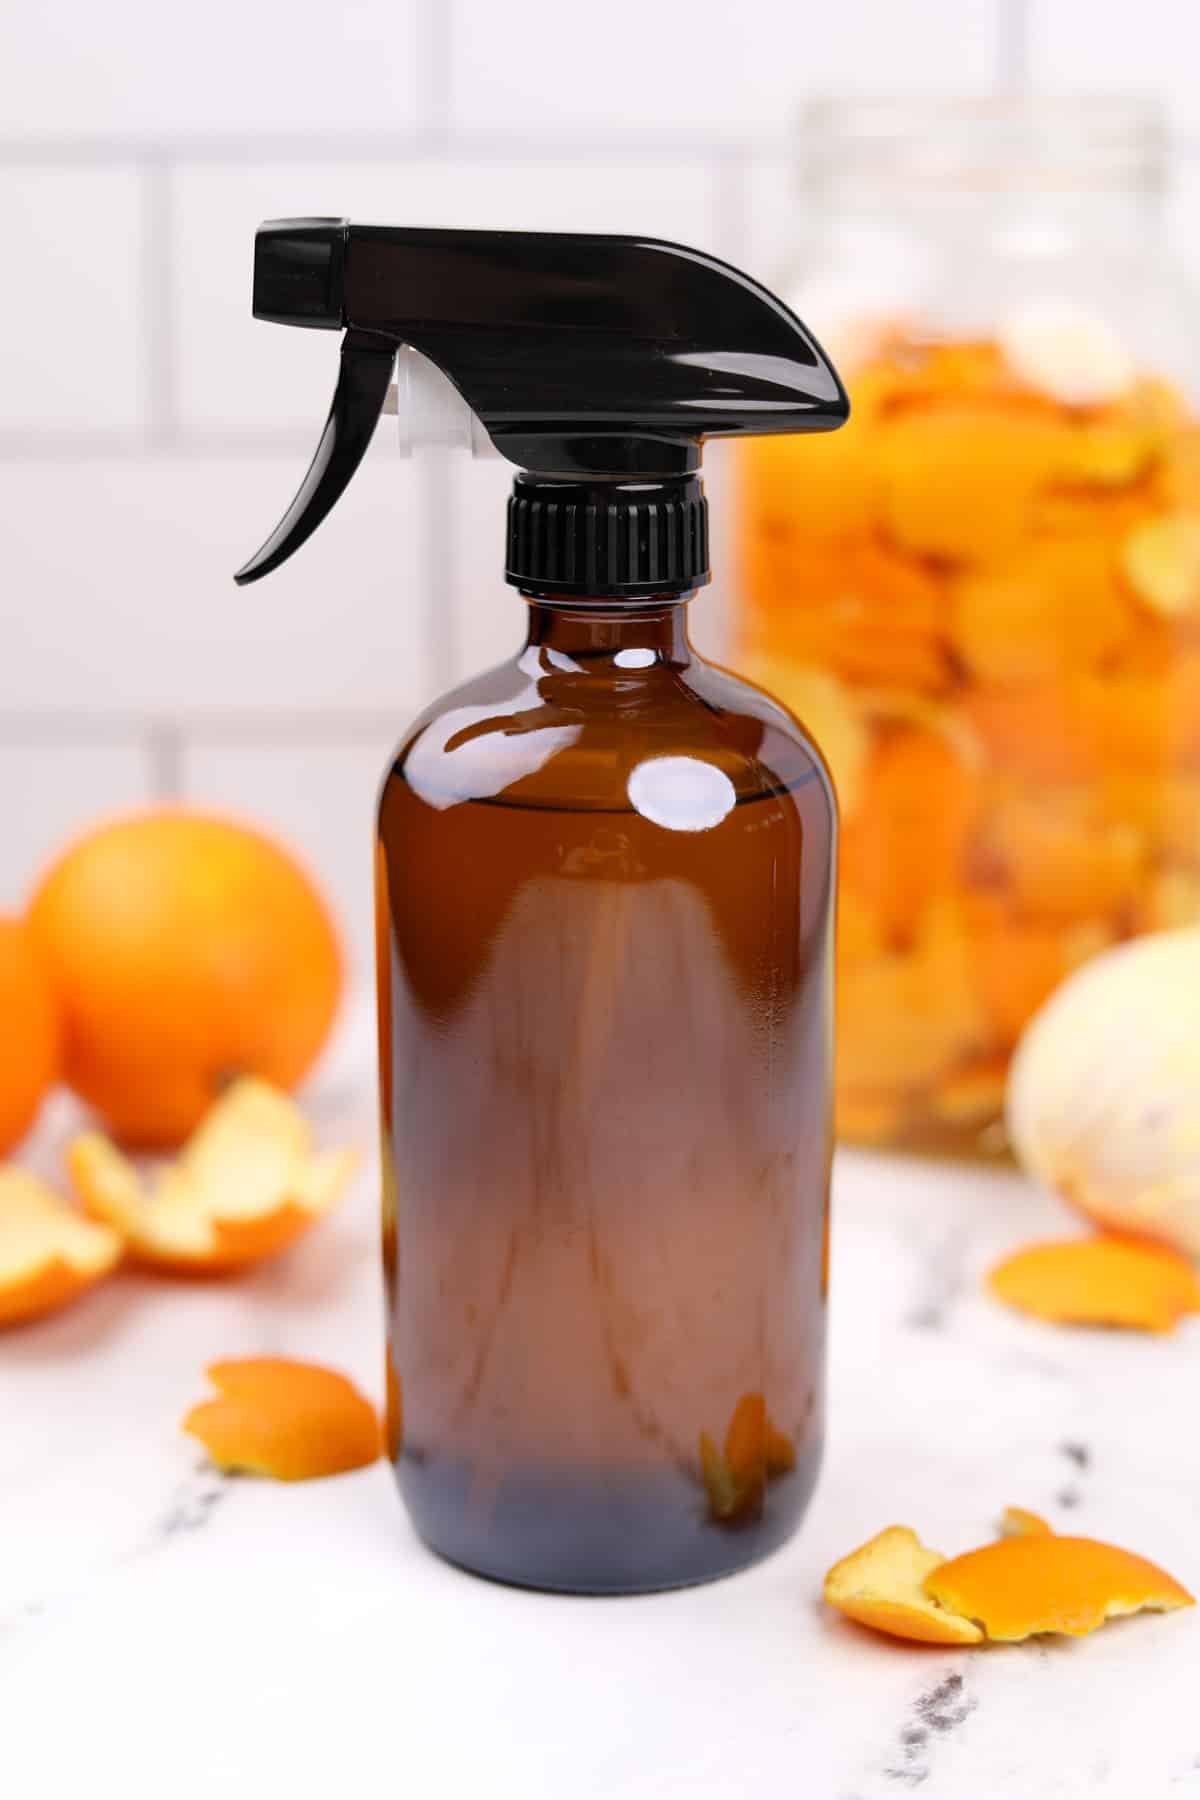 A glass bottle with orange peels and oranges in the background.